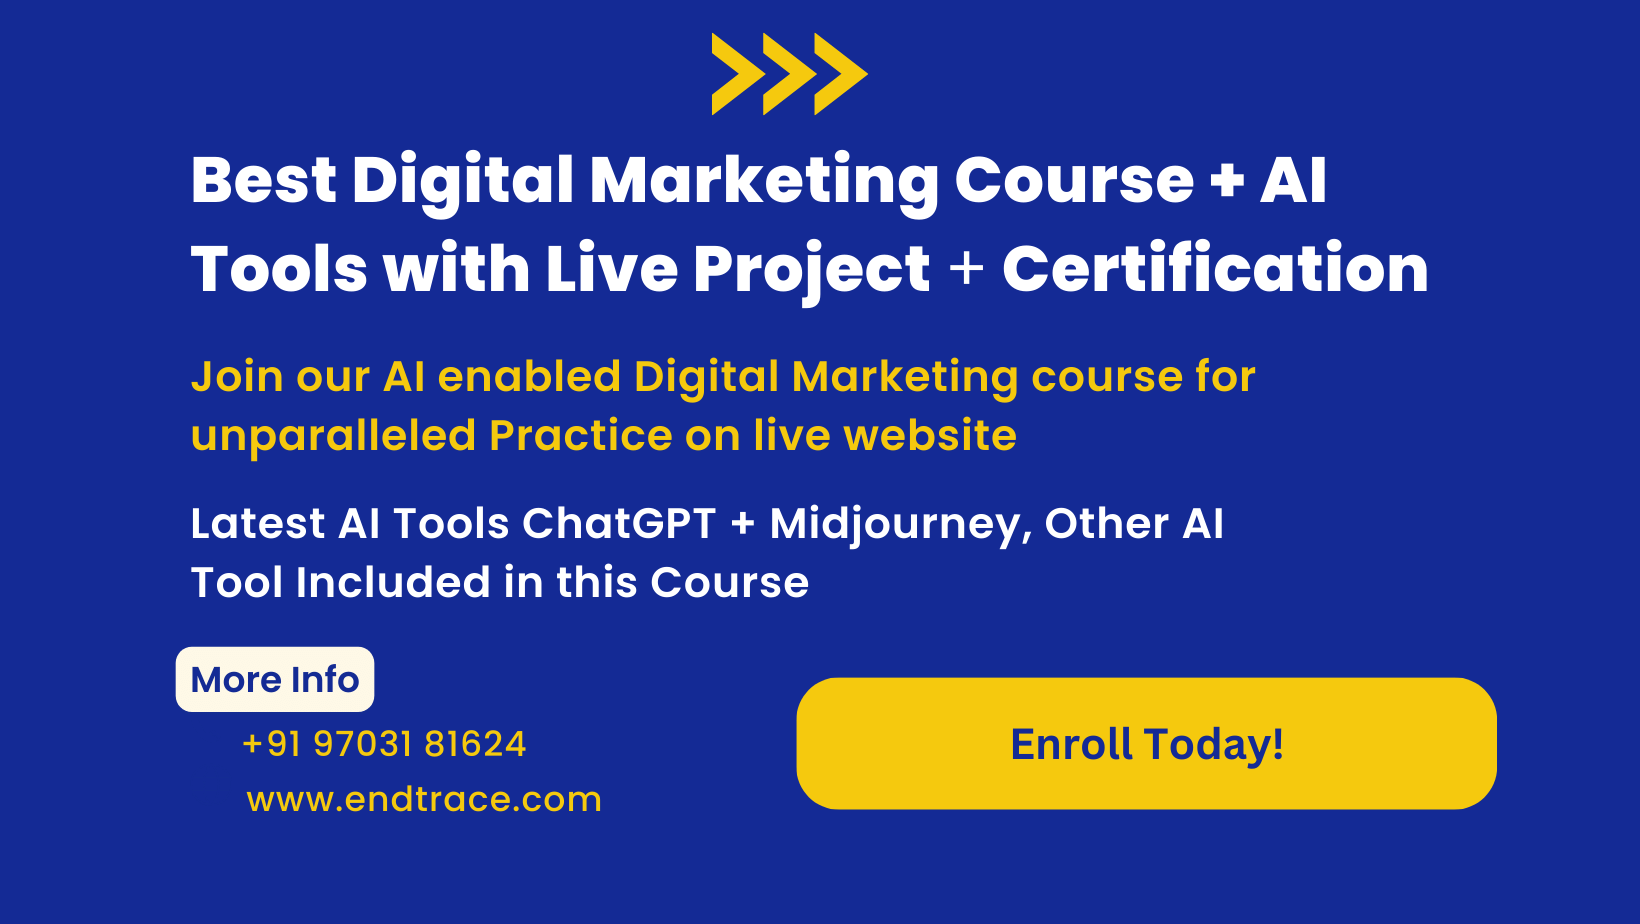 Digital Marketing Course With Live Project